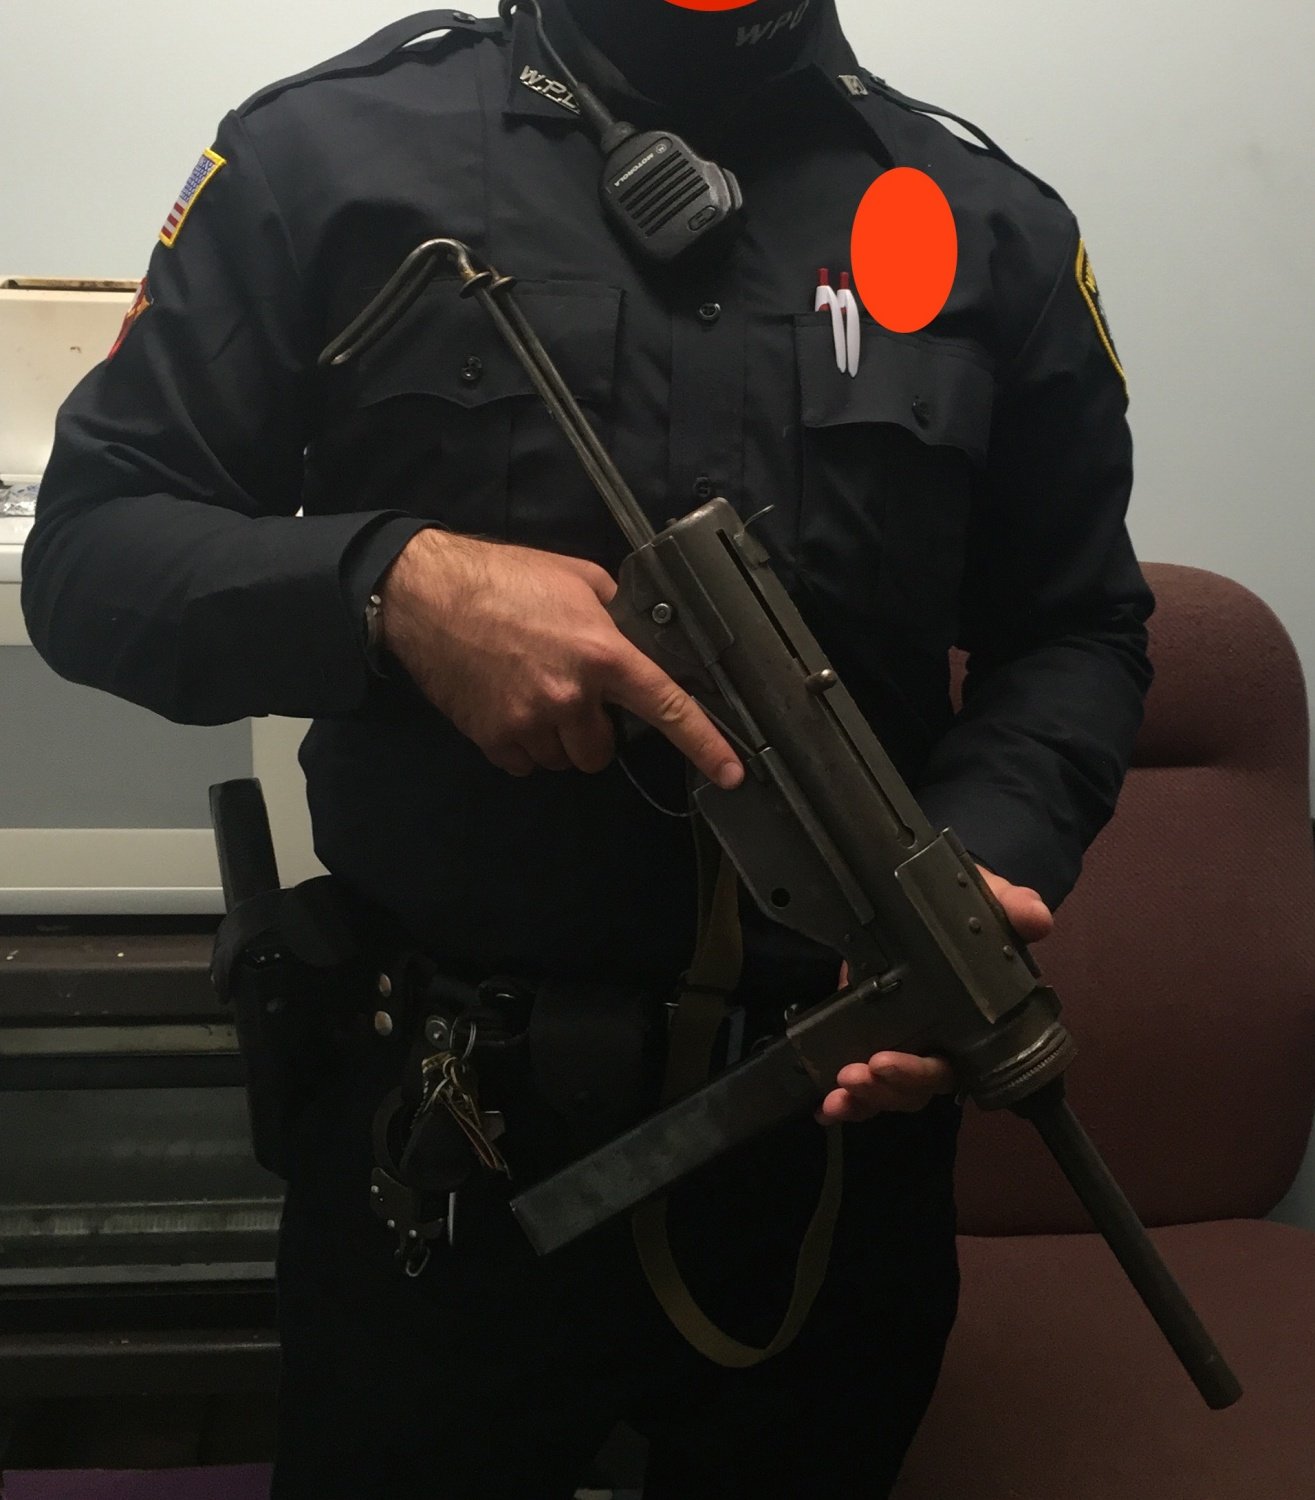 M3 Grease Gun Turned into Police Dept